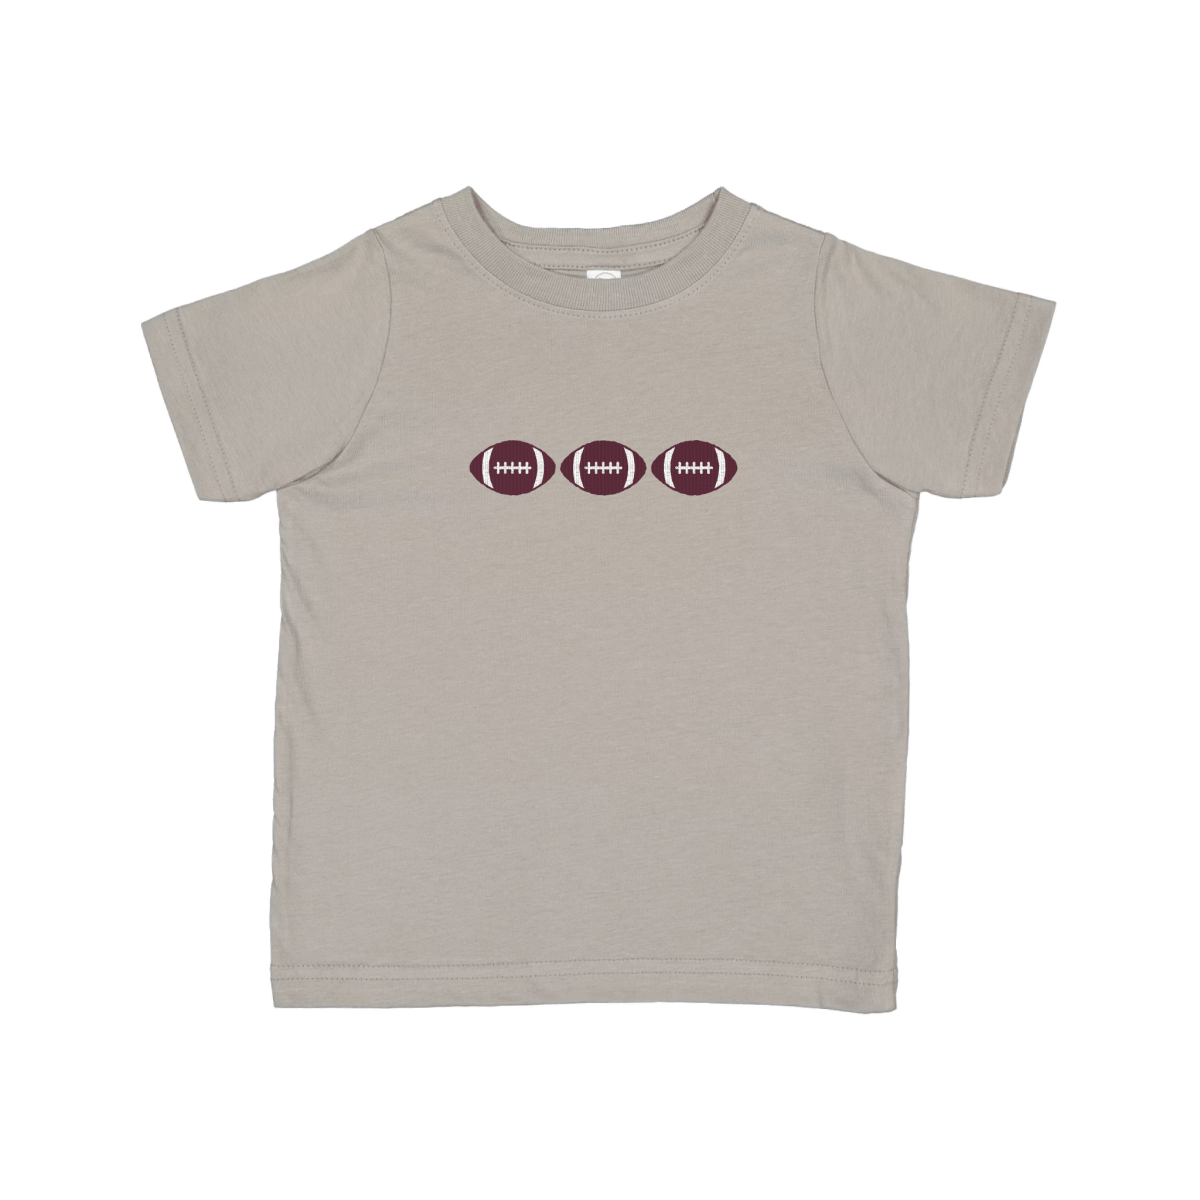 MSU Embroidered Football Toddler T-Shirt - Shop B-Unlimited